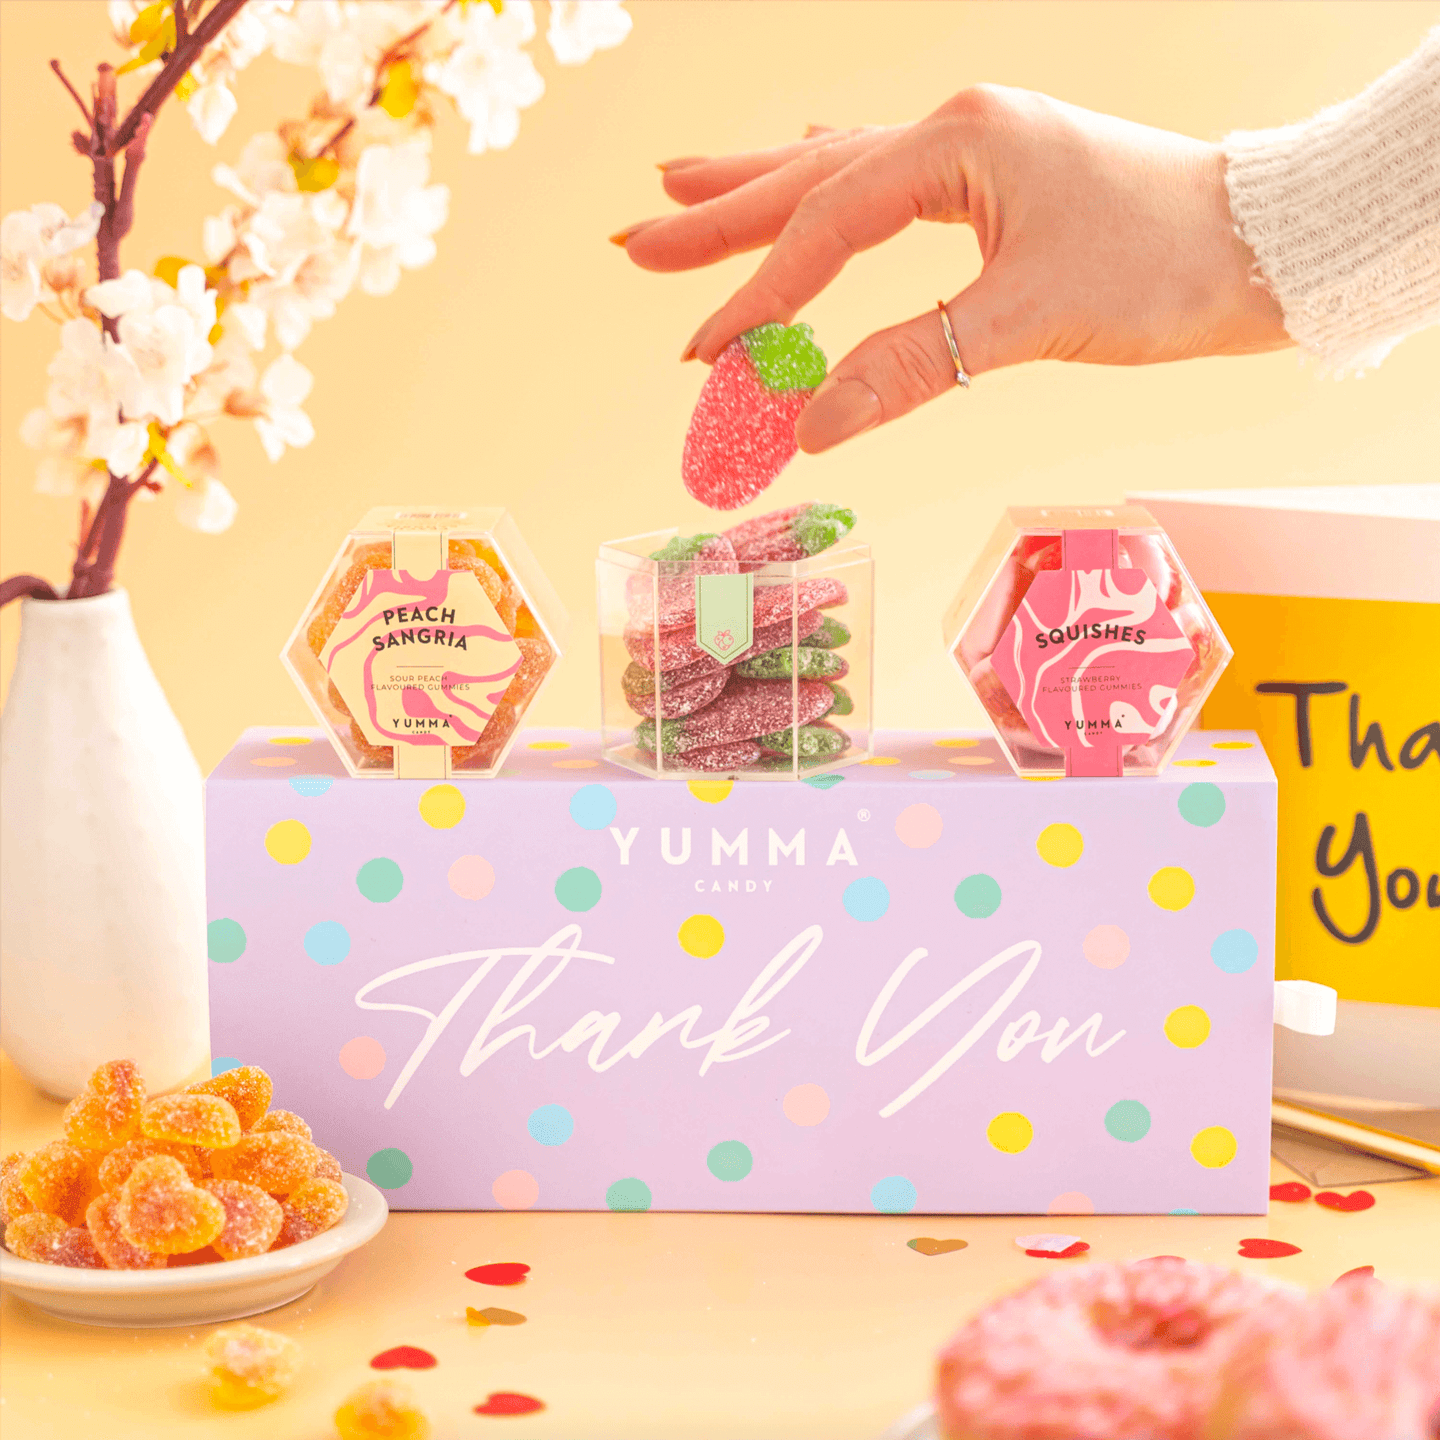 Spoil her with Sweets this Mother's Day